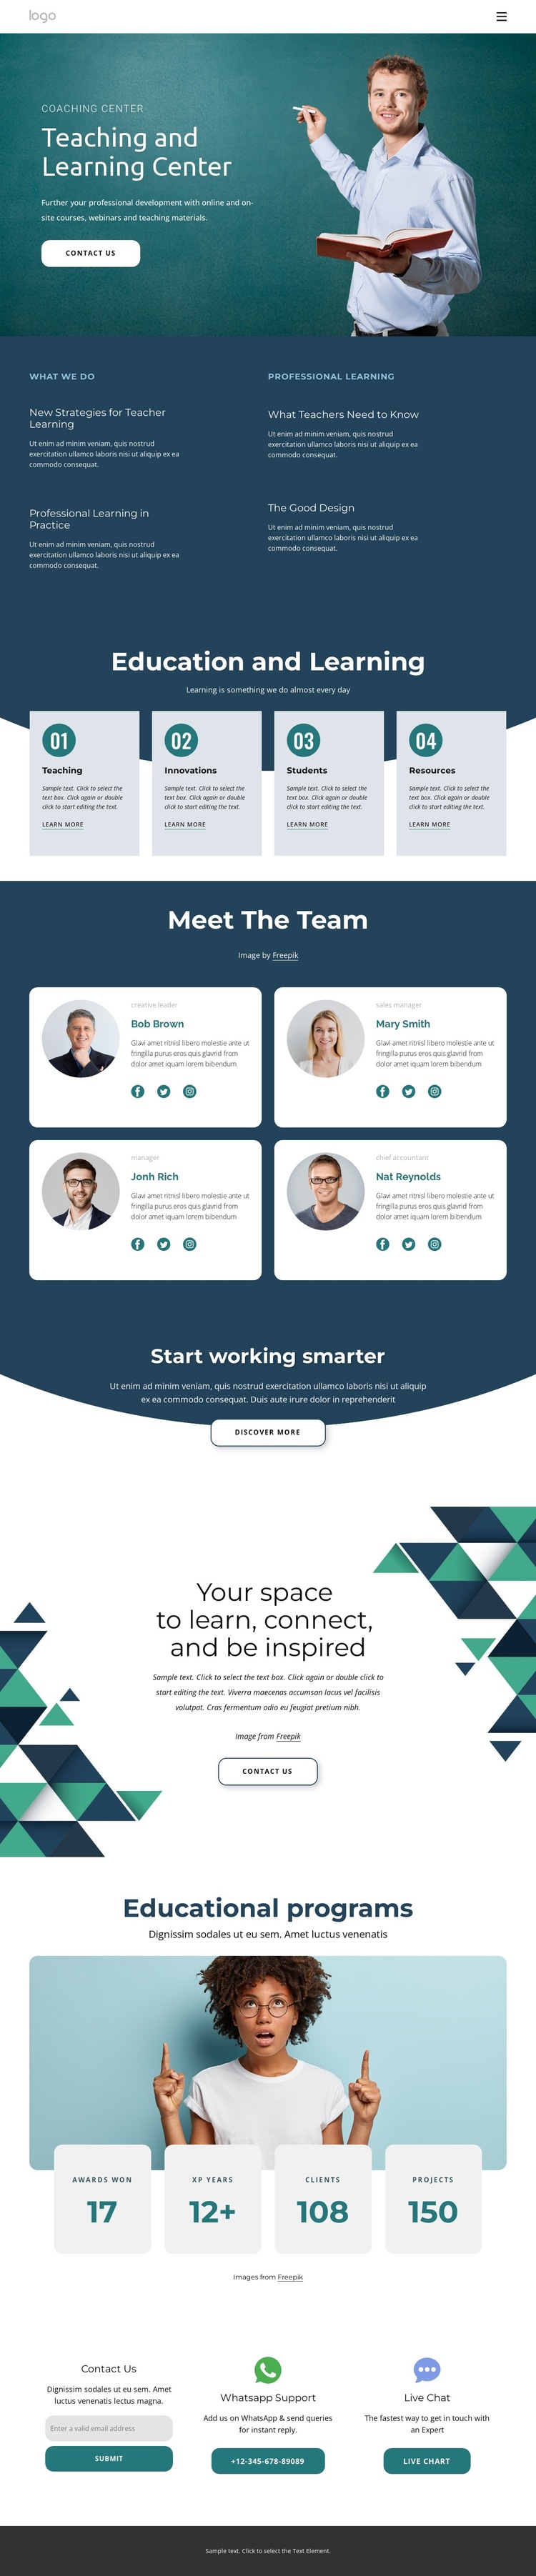 Teaching and learning center HTML5 Template